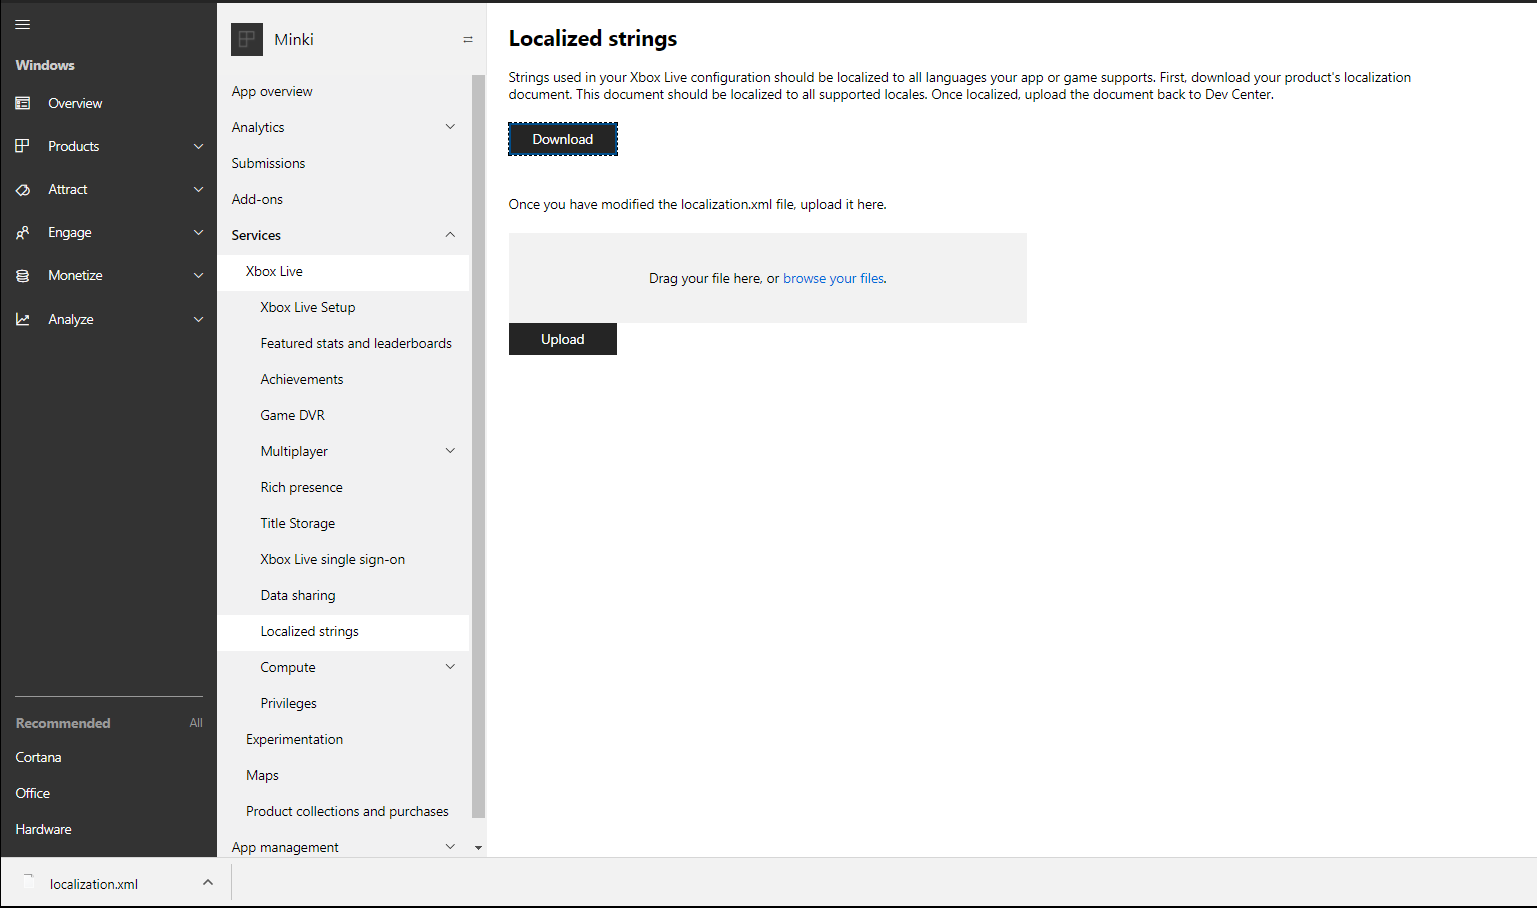 Screenshot of the Localized strings configuration page in Partner Center.